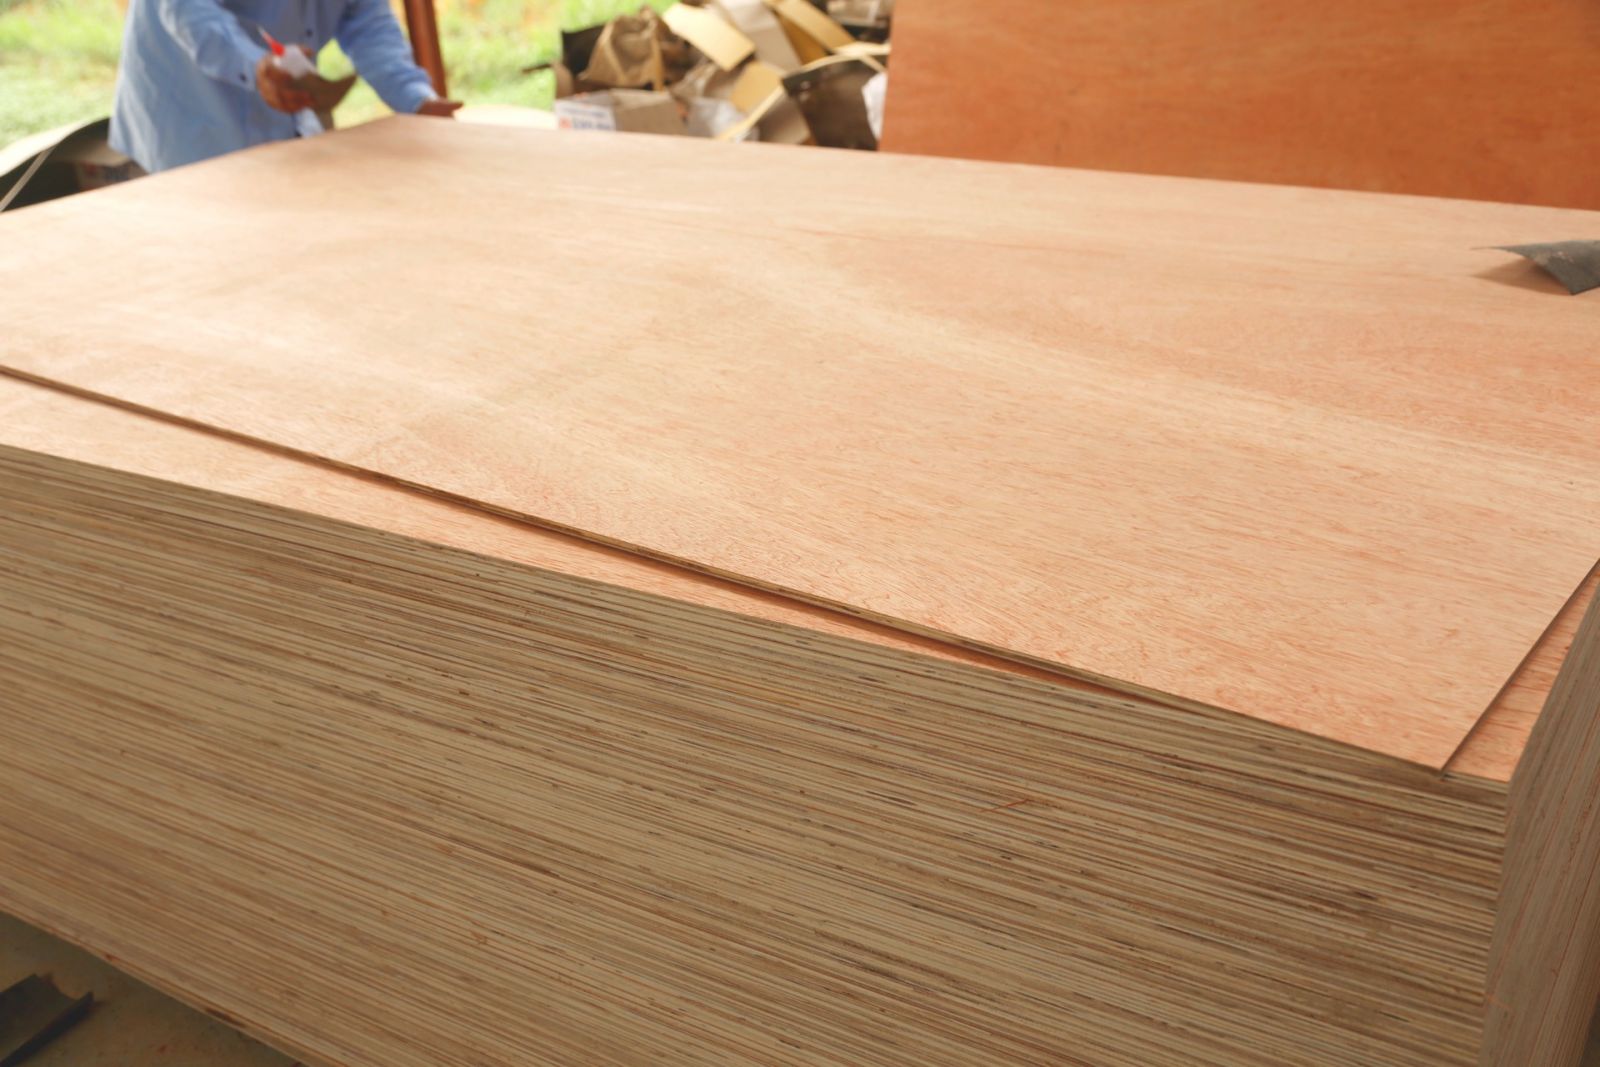 What is plywood and its applications